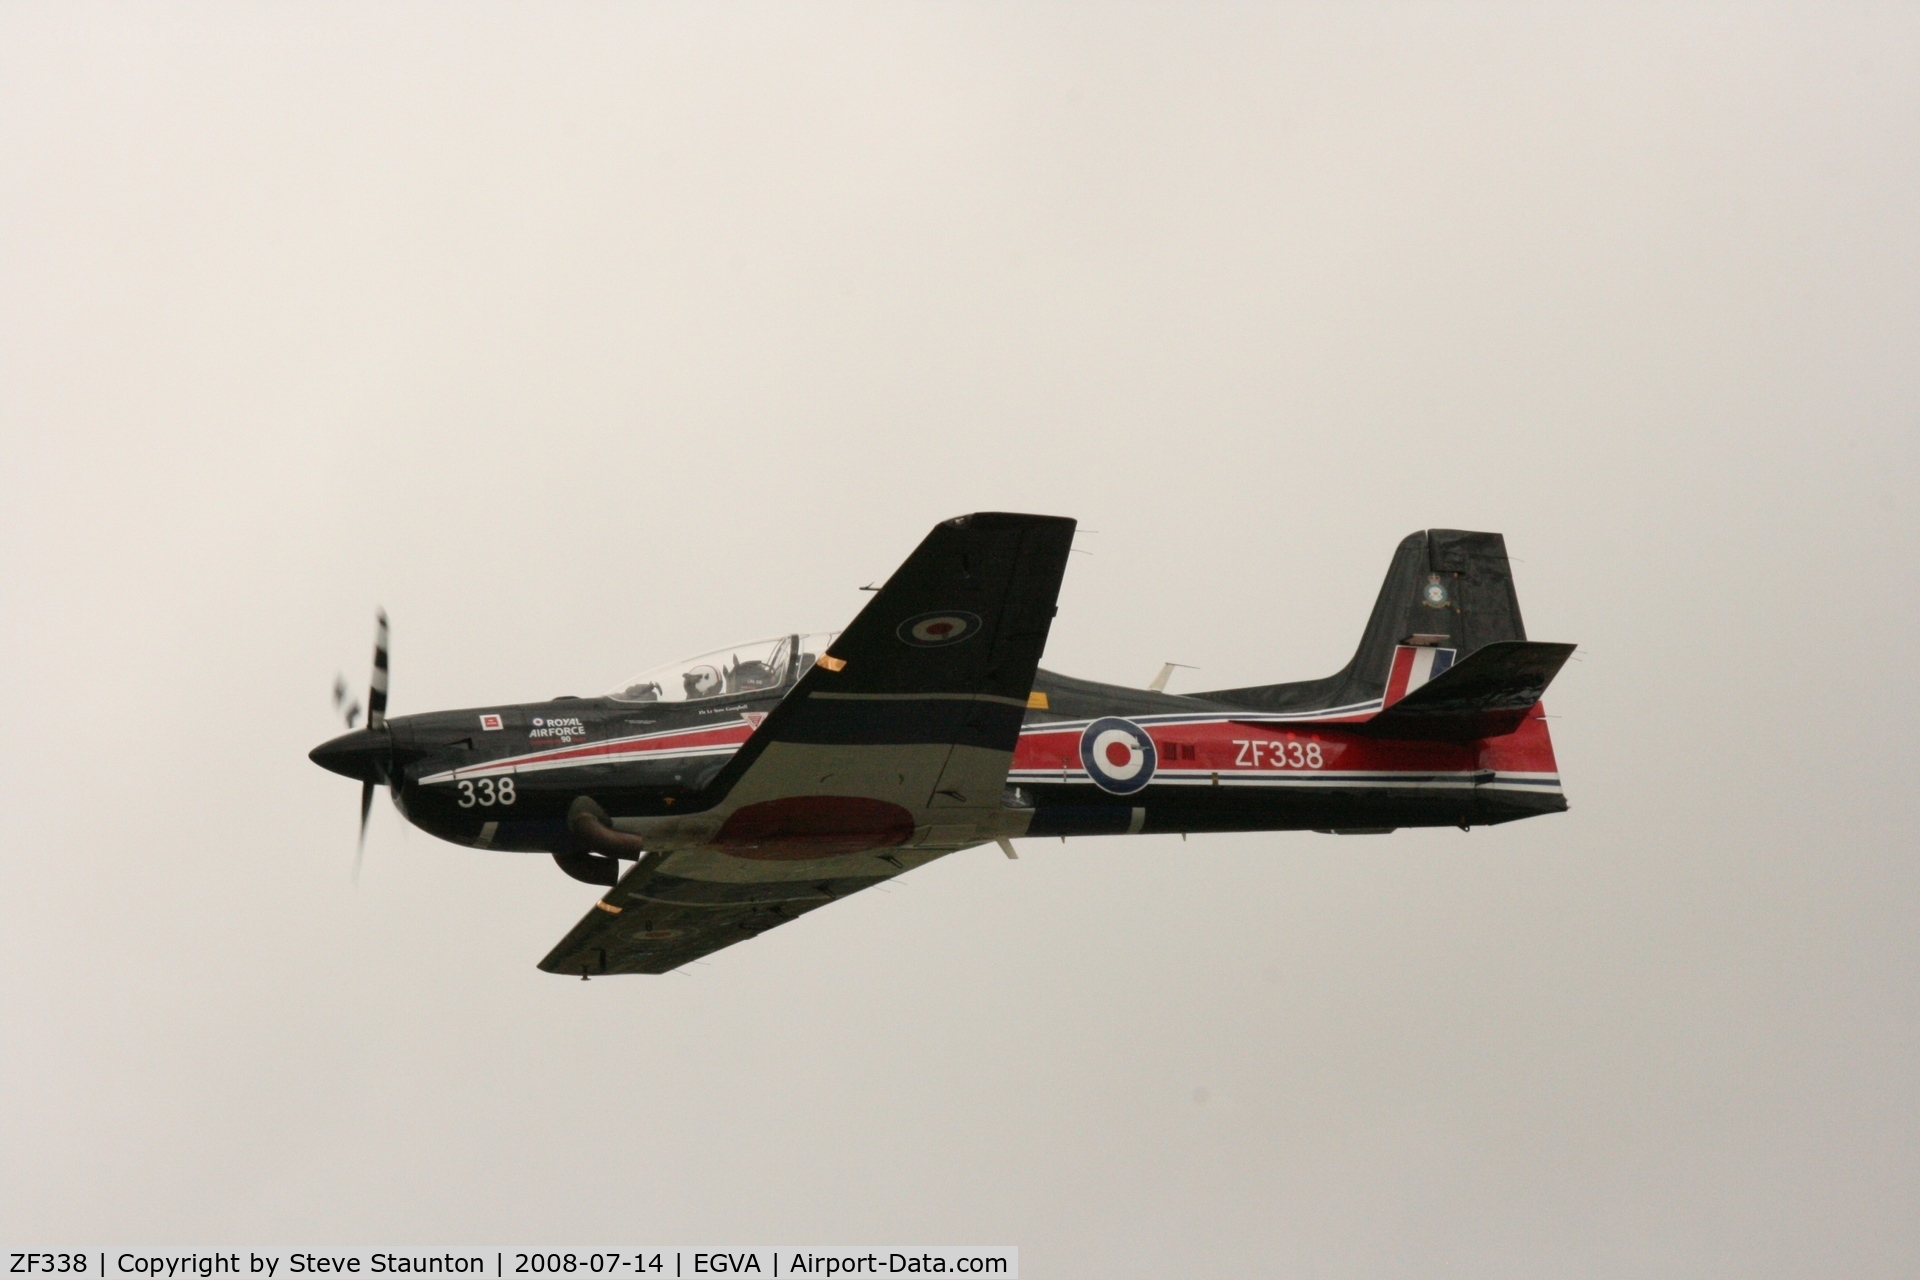 ZF338, 1991 Short S-312 Tucano T1 C/N S102/T73, Taken at the Royal International Air Tattoo 2008 during arrivals and departures (show days cancelled due to bad weather)